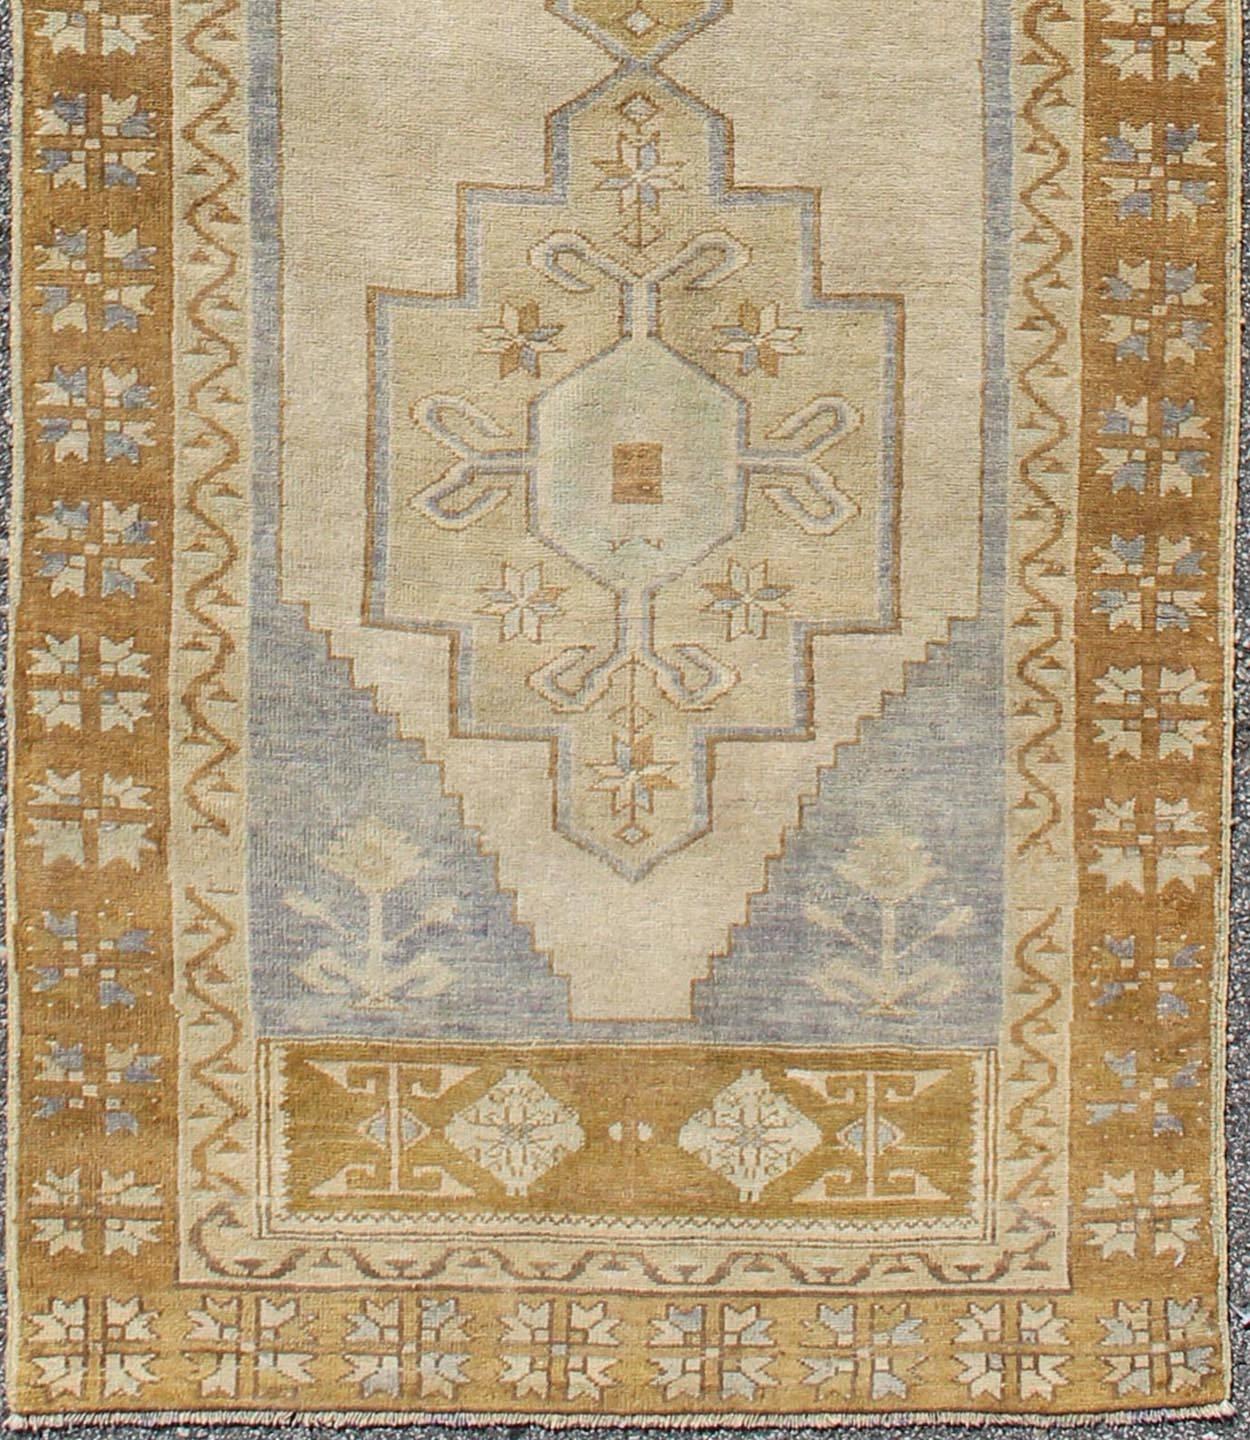 Chartreuse, taupe and ivory Vintage Turkish Oushak runner with Three Medallions, rug en-905, country of origin / type: Turkey / Oushak, circa 1930.

This vintage Turkish Oushak gallery rug (circa 1930) features a unique blend of colors and an